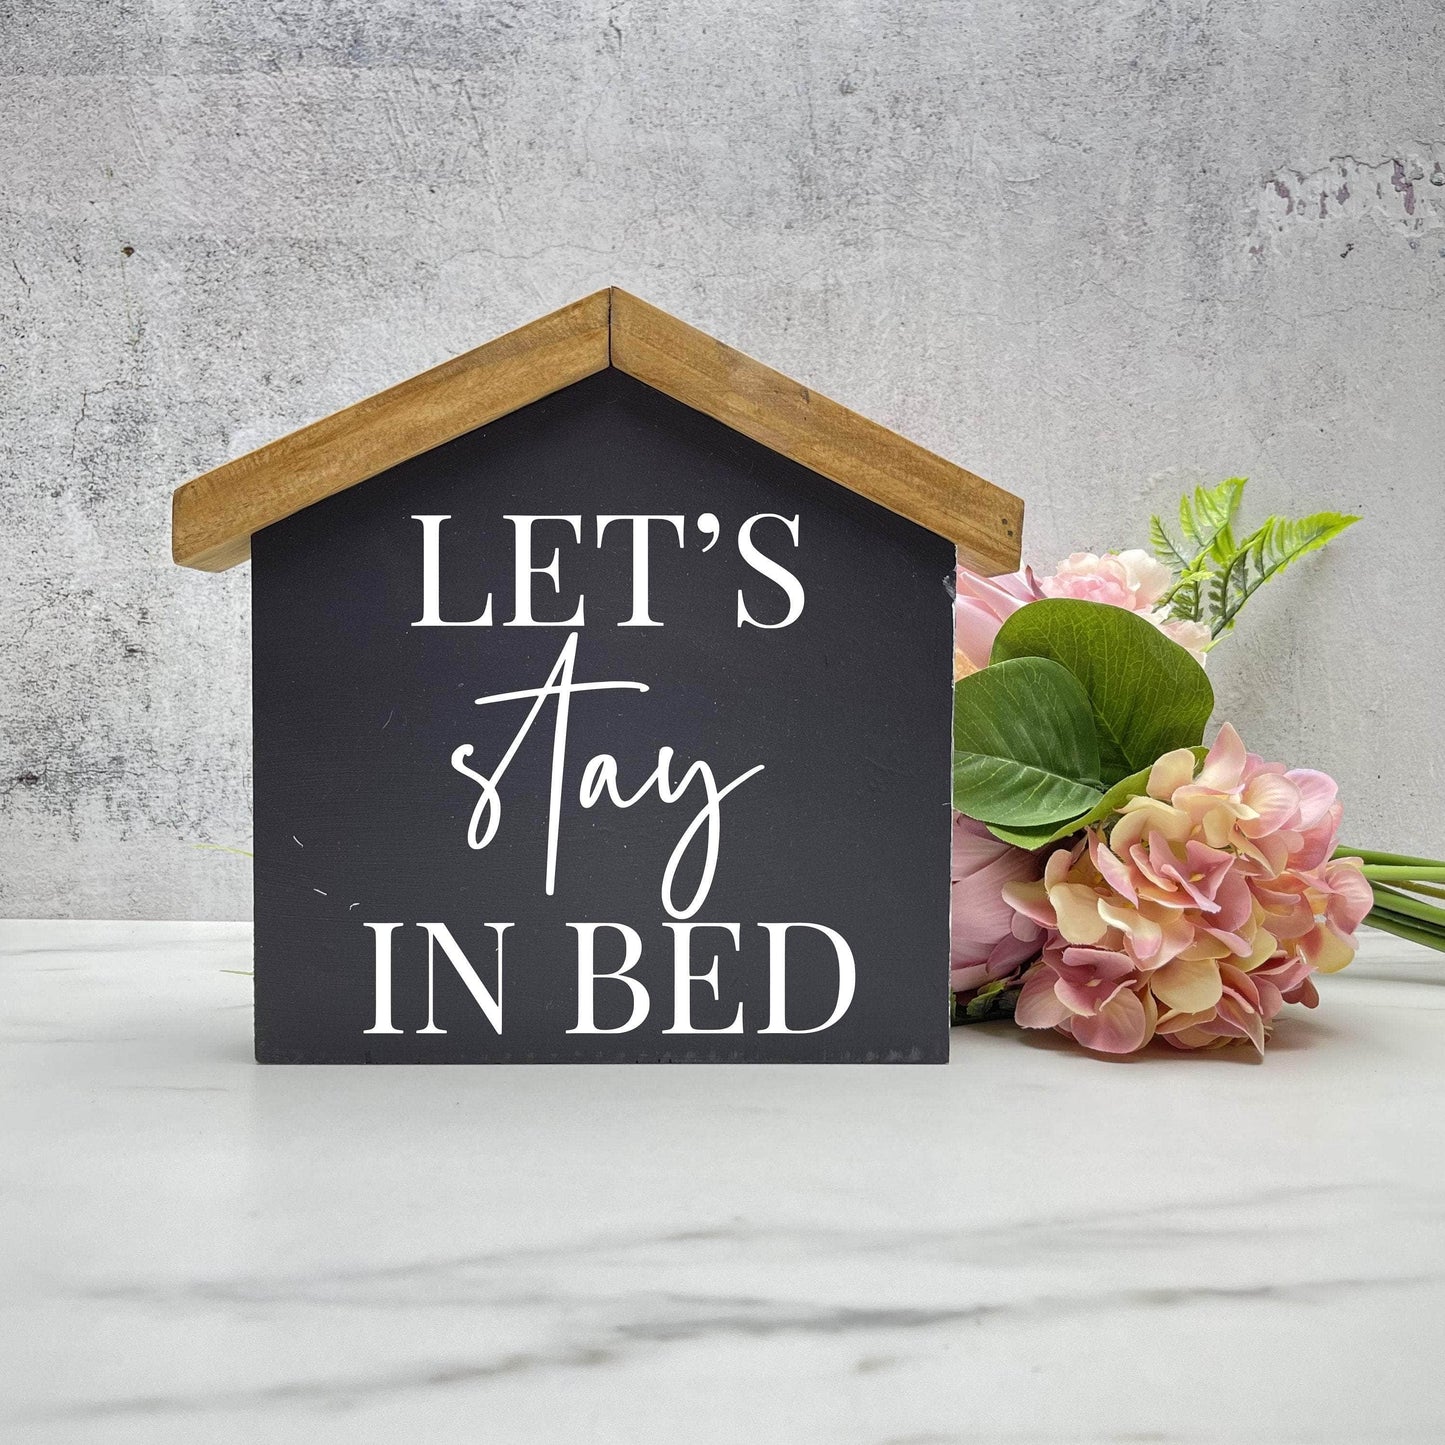 Lets stay in bed House wood sign, love sign, couples gift sign, quote sign, home decor